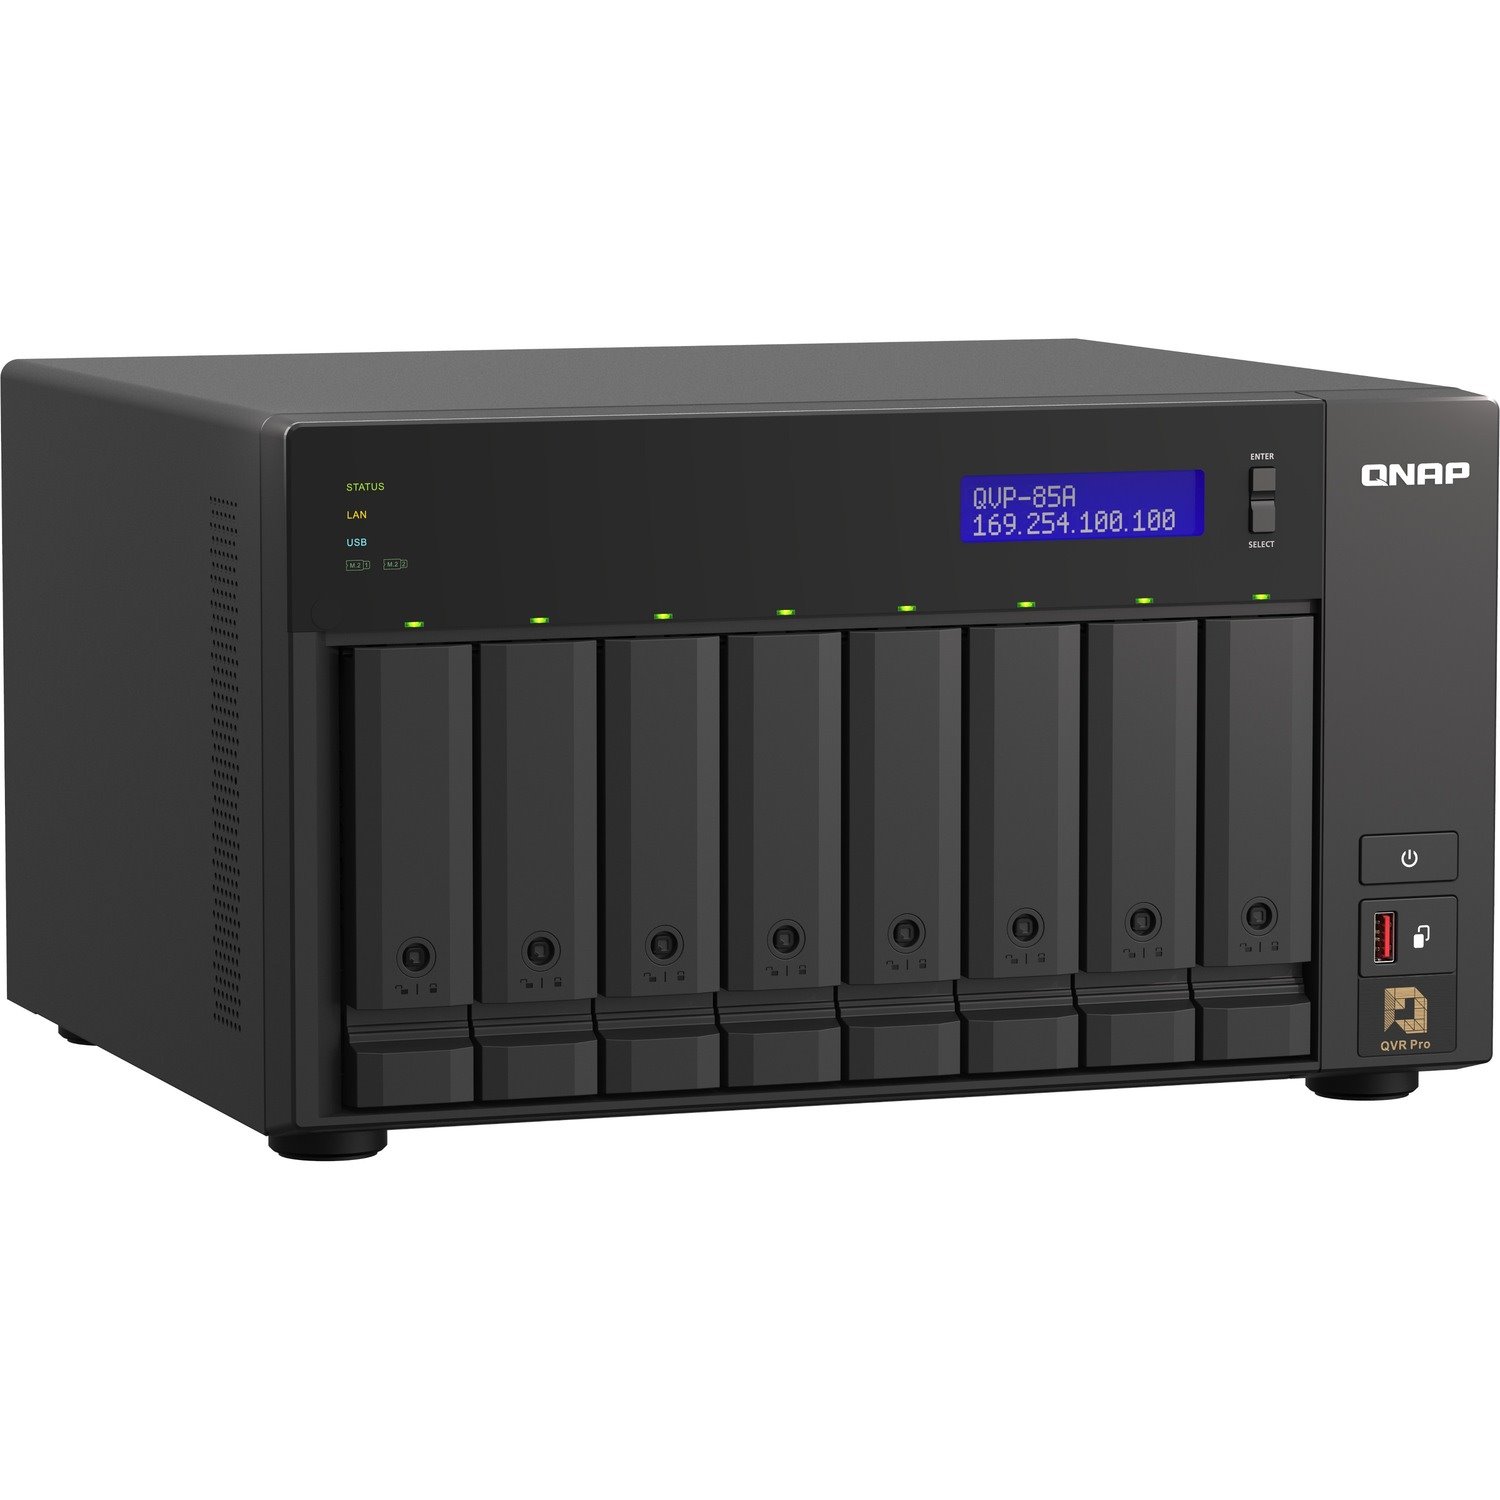 QNAP 8-Bay High-Performance NVR for SMBs, SOHO, and Home